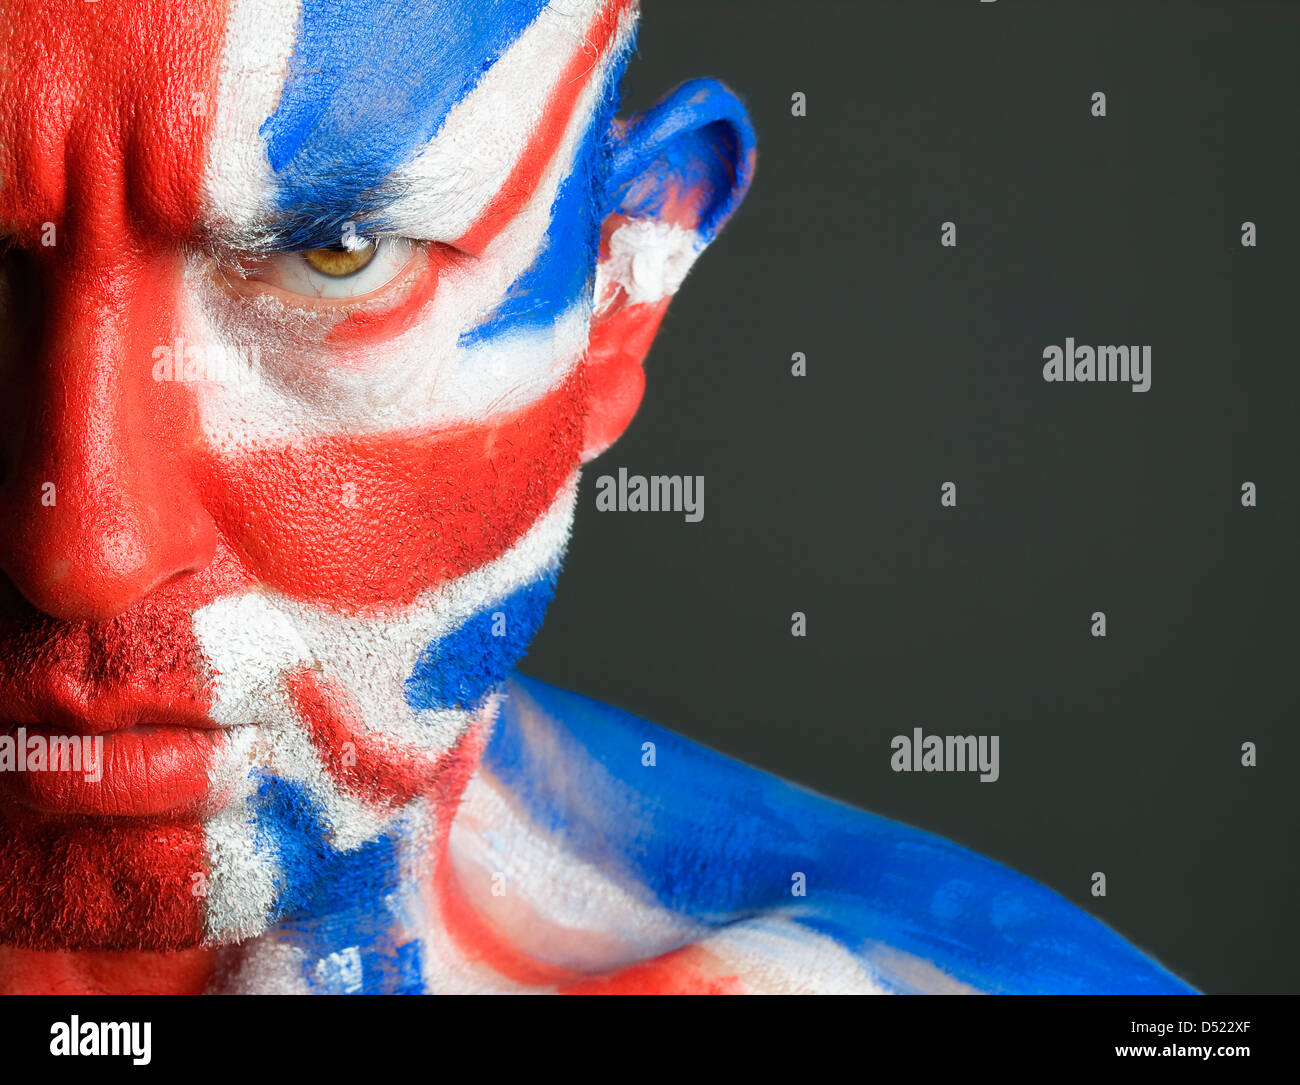 Man with his face painted with the flag of United Kingdom. The man is serious and photographic composition leaves only half of t Stock Photo